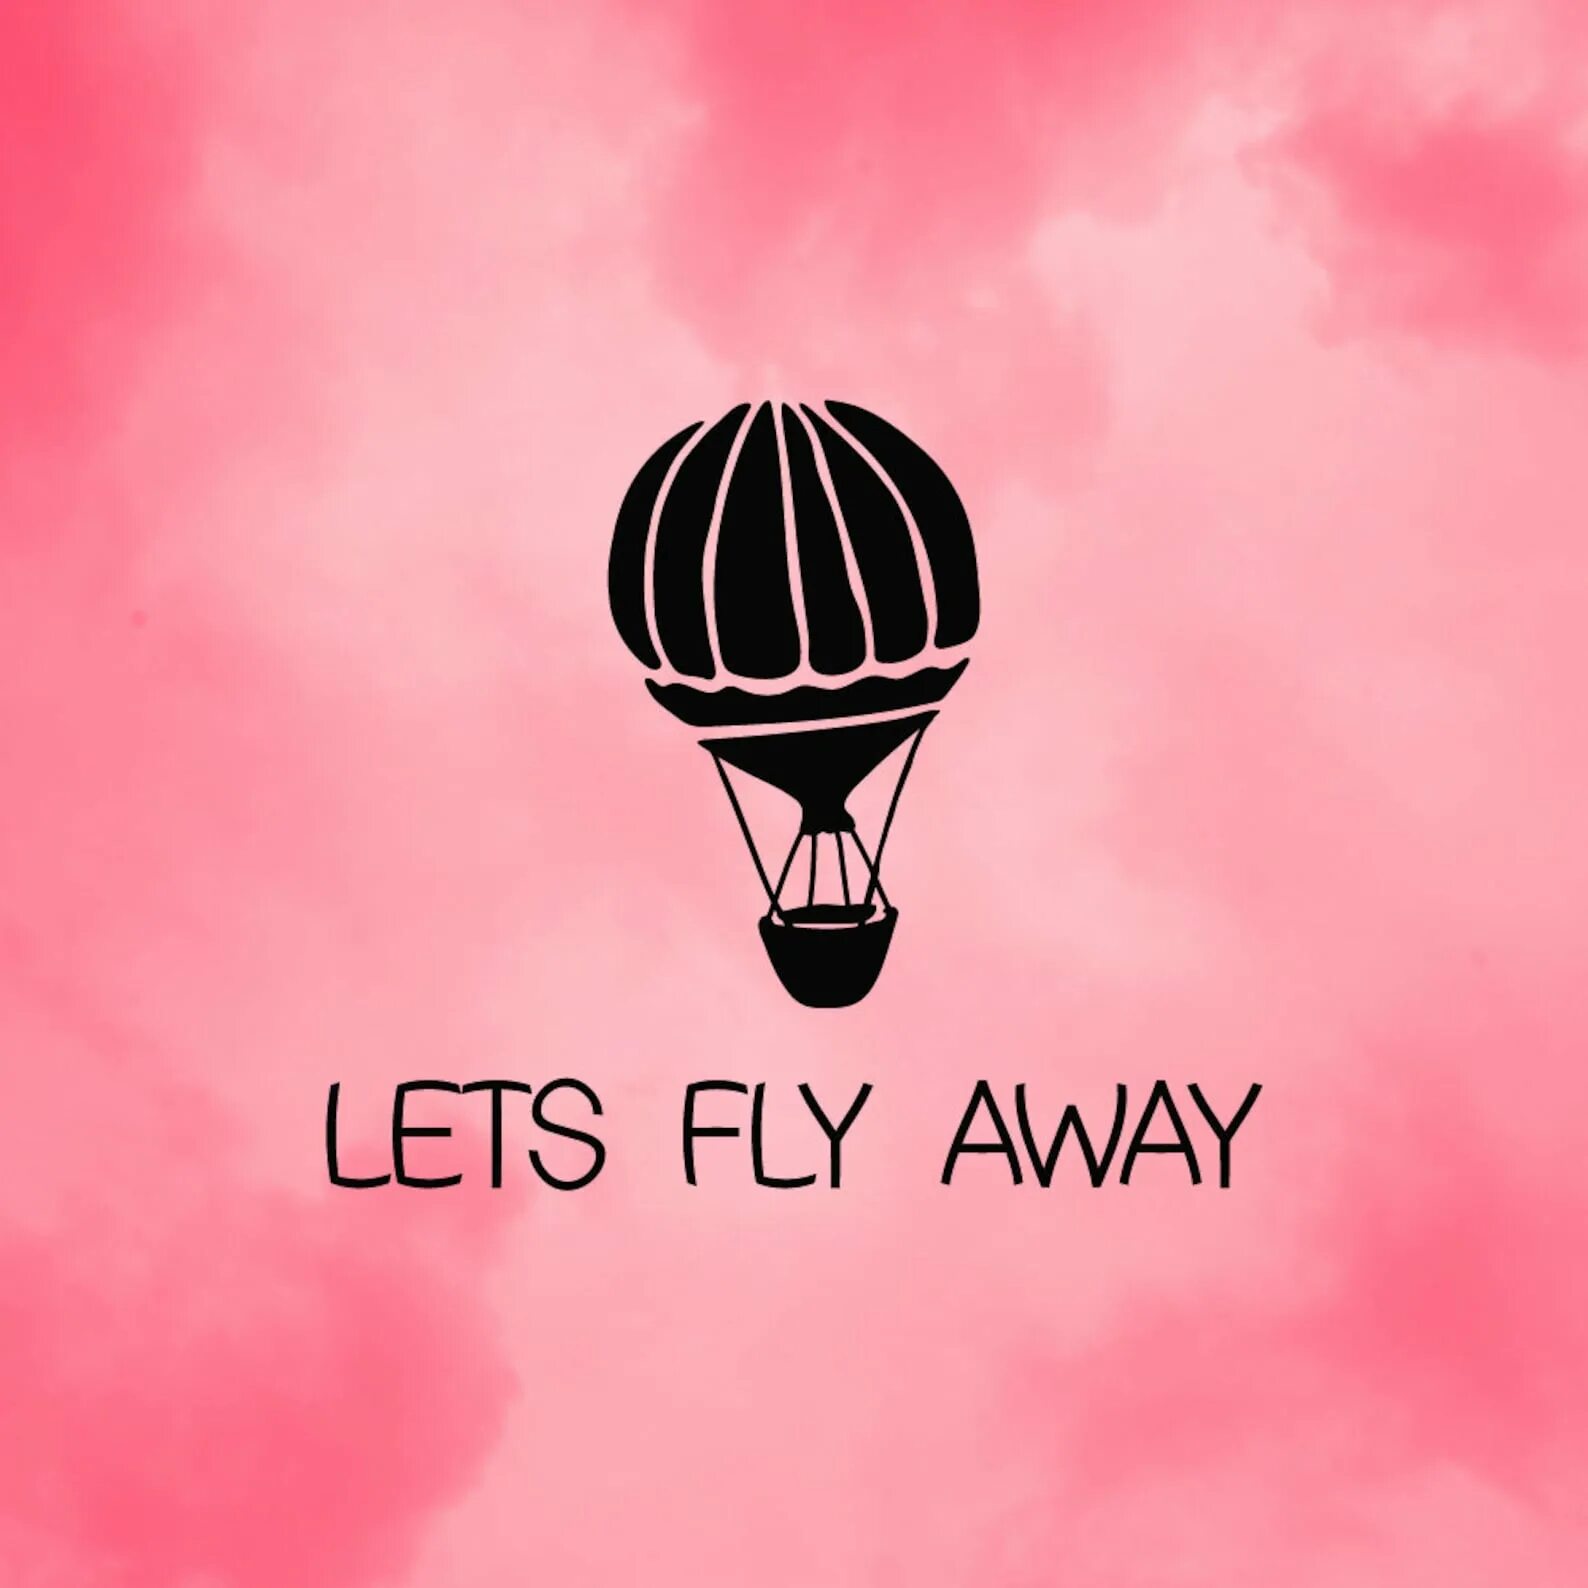 Hot away. Levo - Let's Fly away. Let's Fly away (Original Mix). Let's Fly надпись. Lets Fly away перевод.